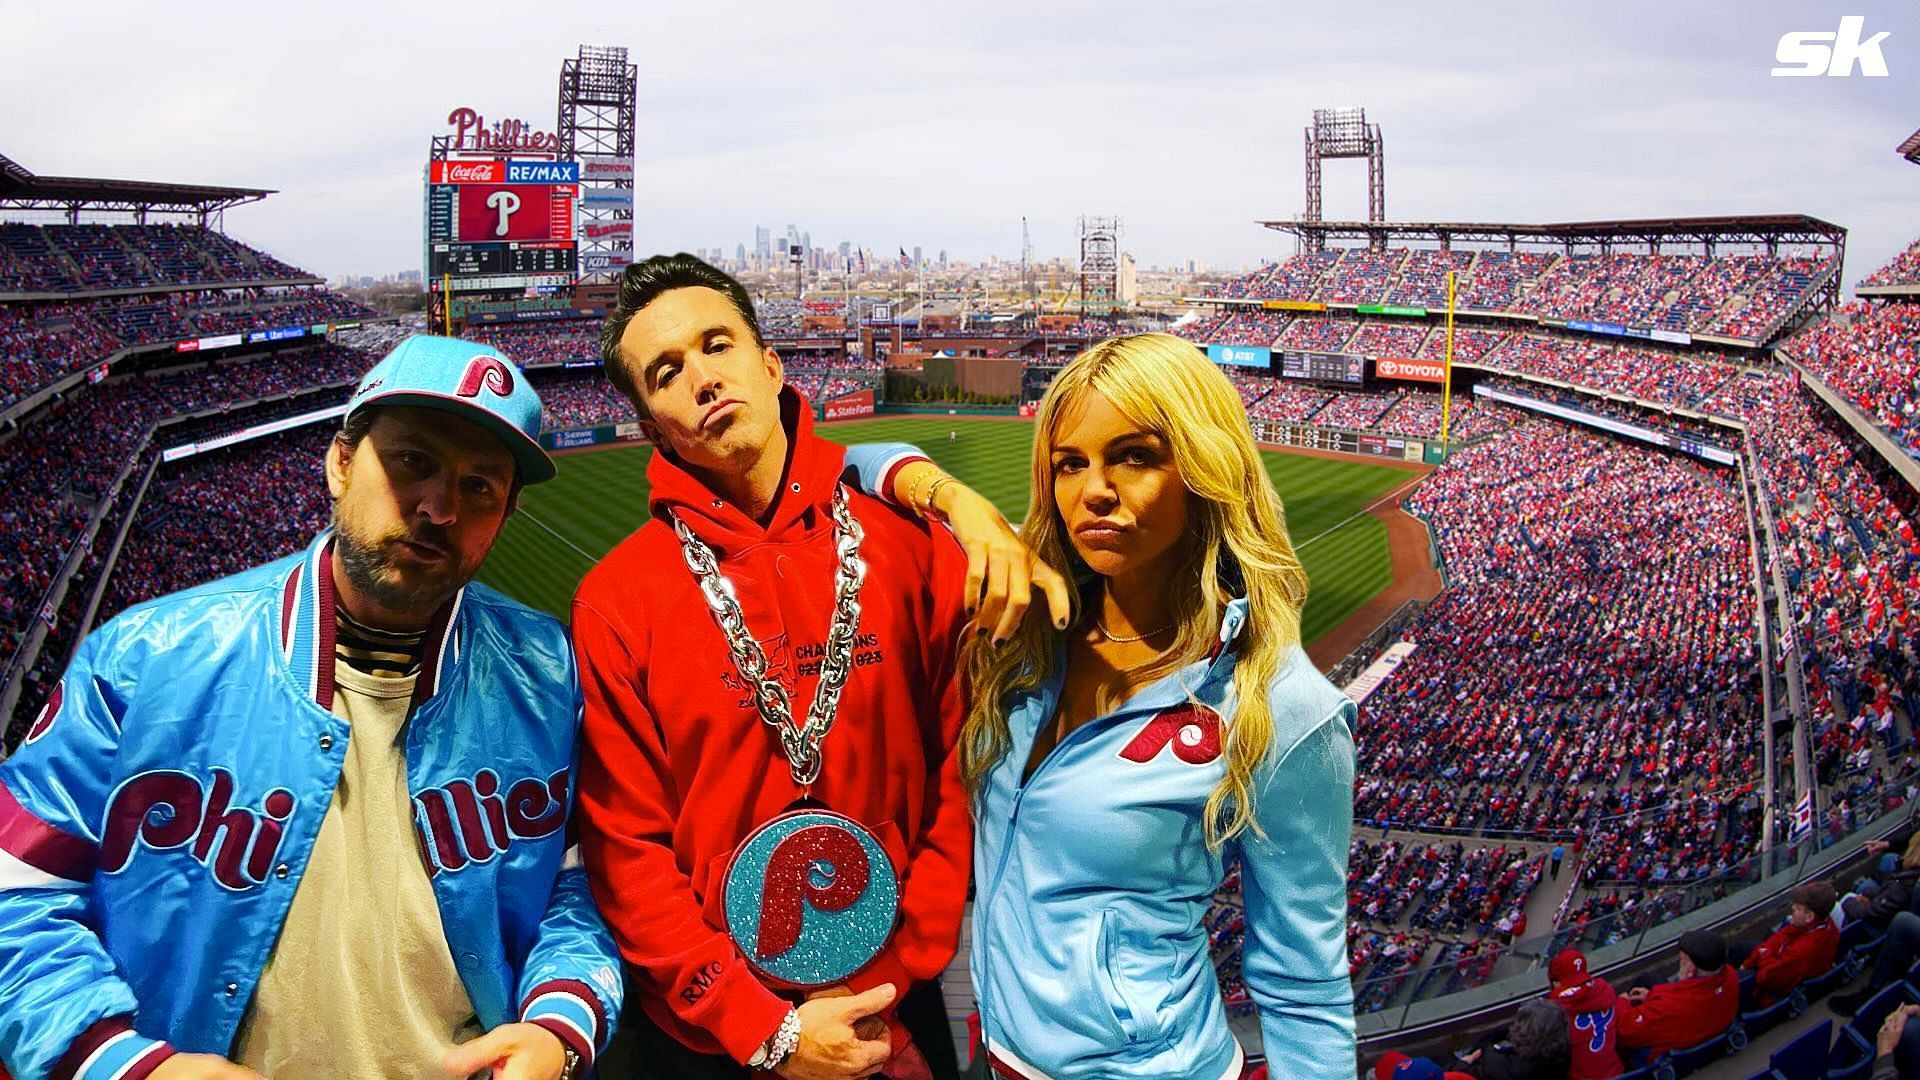 Some special Philadelphia Phillies fans were in attendance for Game 2